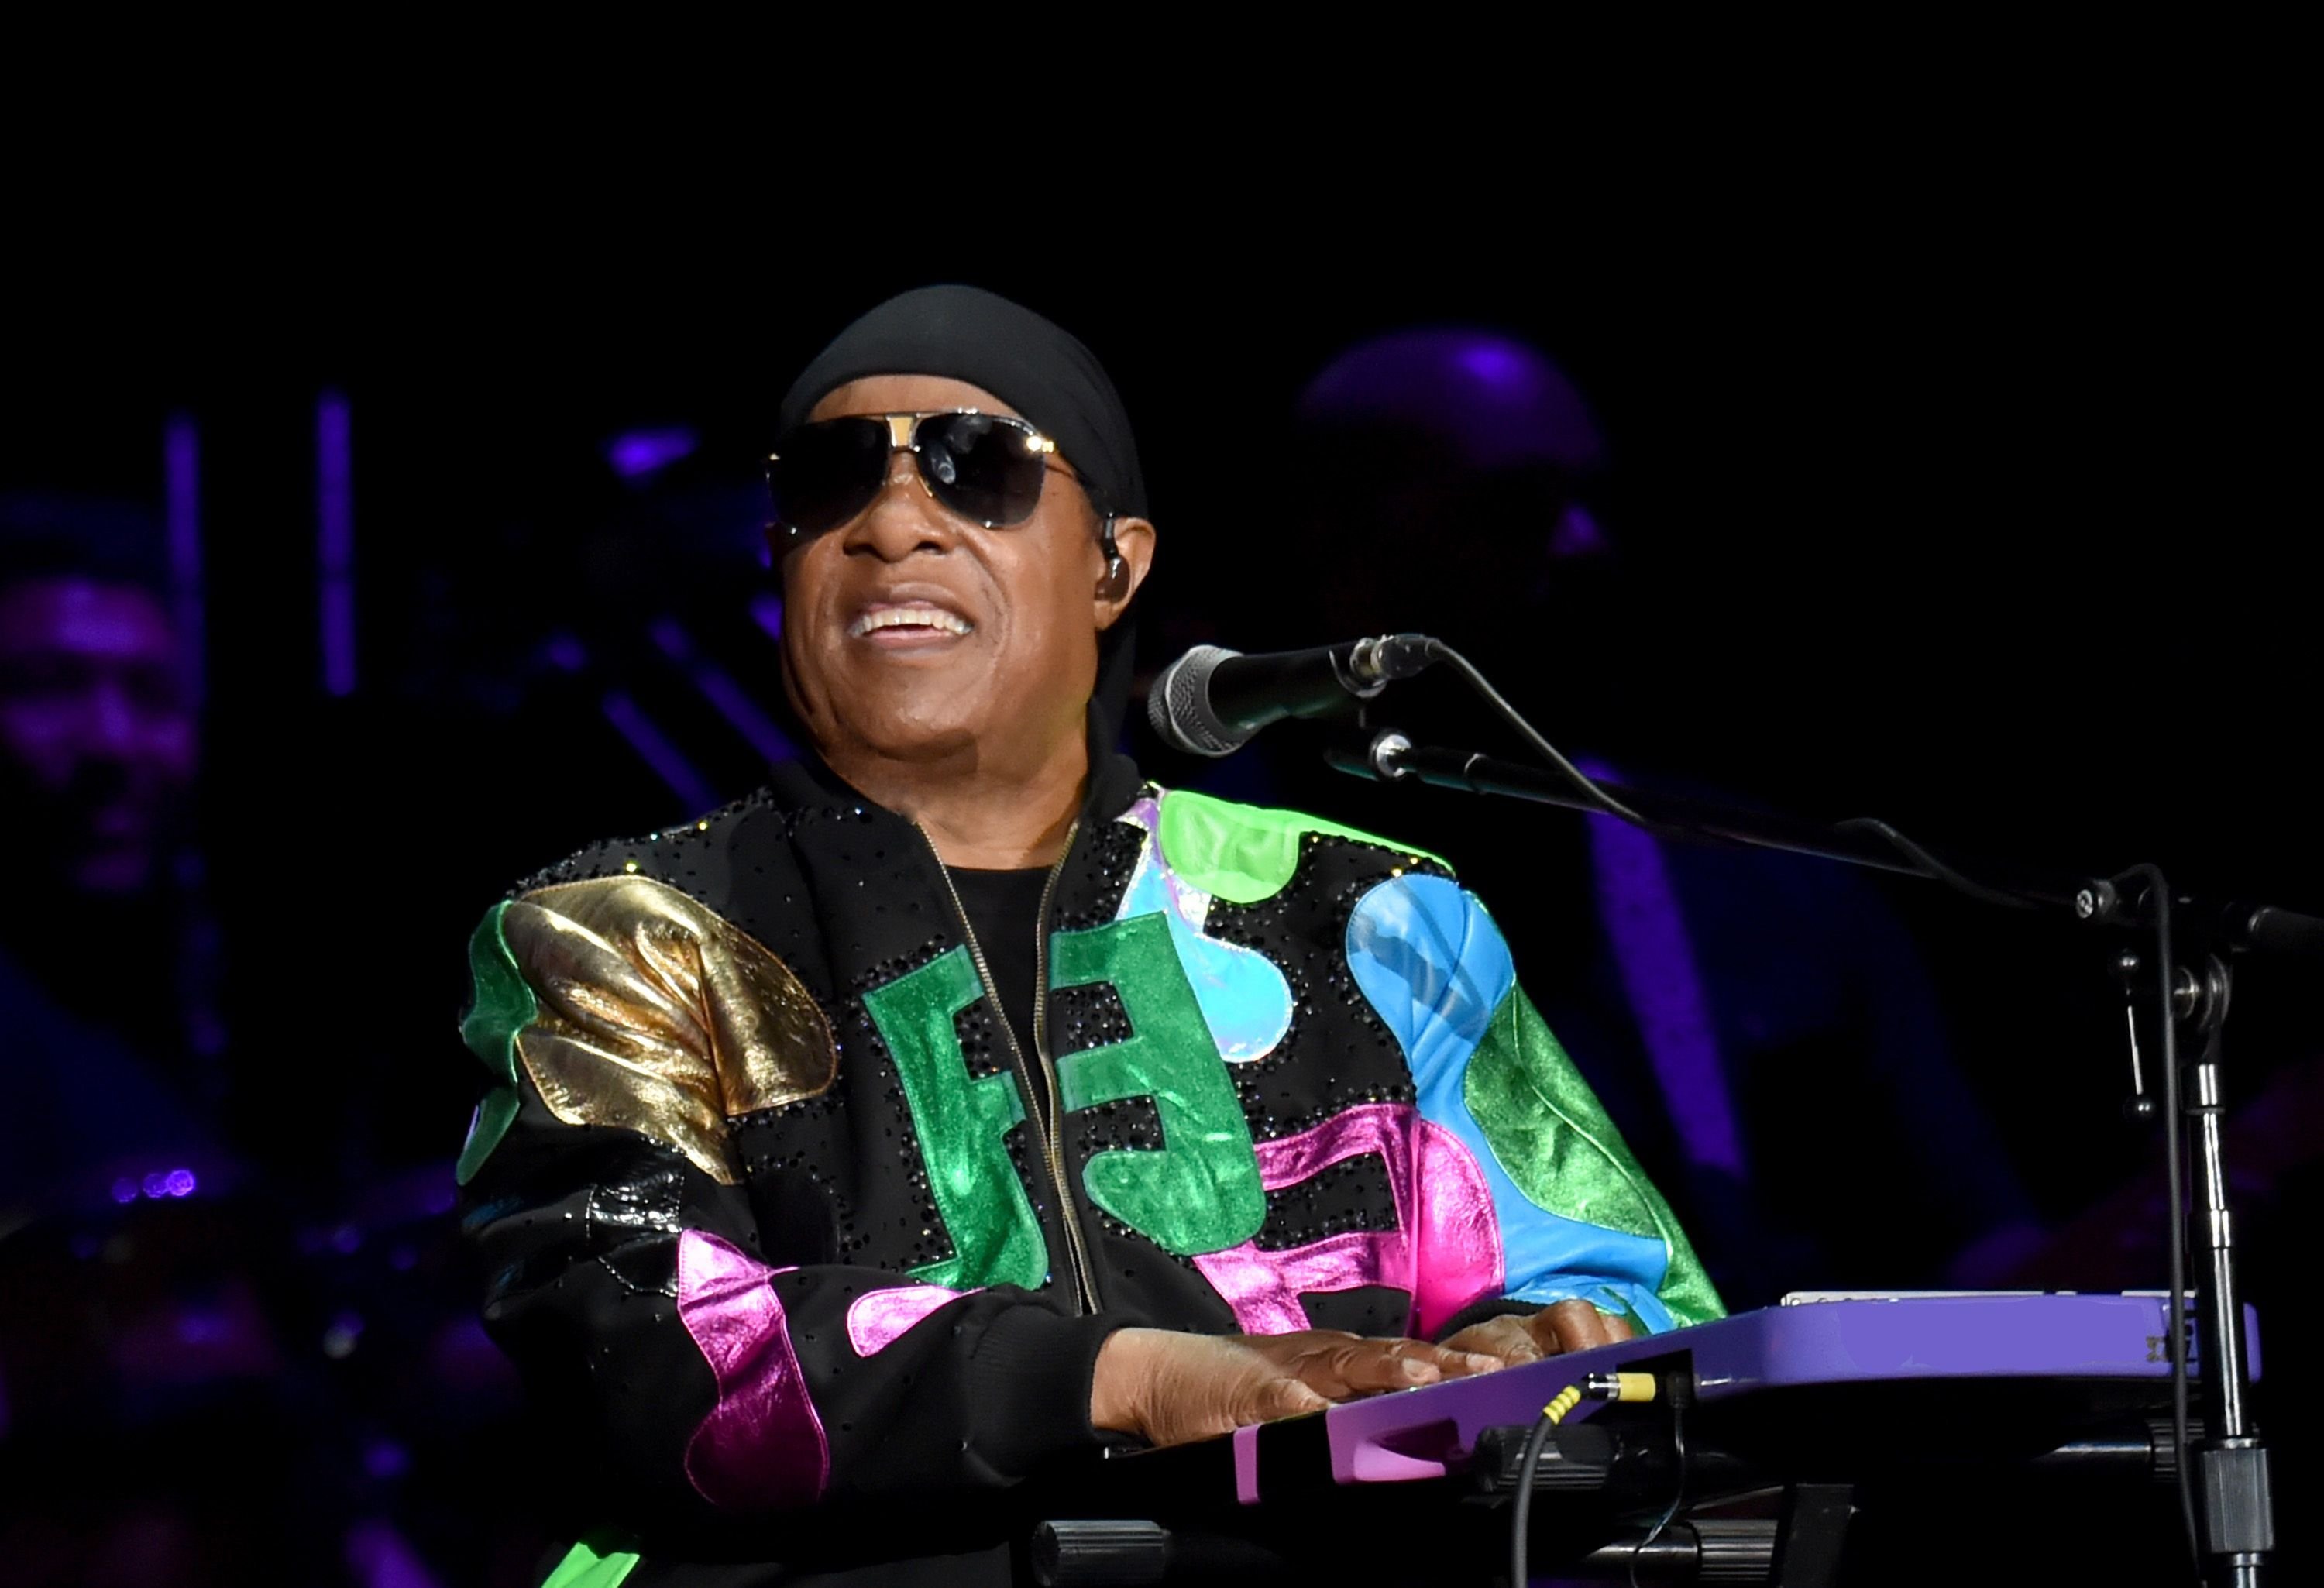 Stevie Wonder at the British Summer Time Hyde Park concert in 2019 in London, England | Source: Getty Images